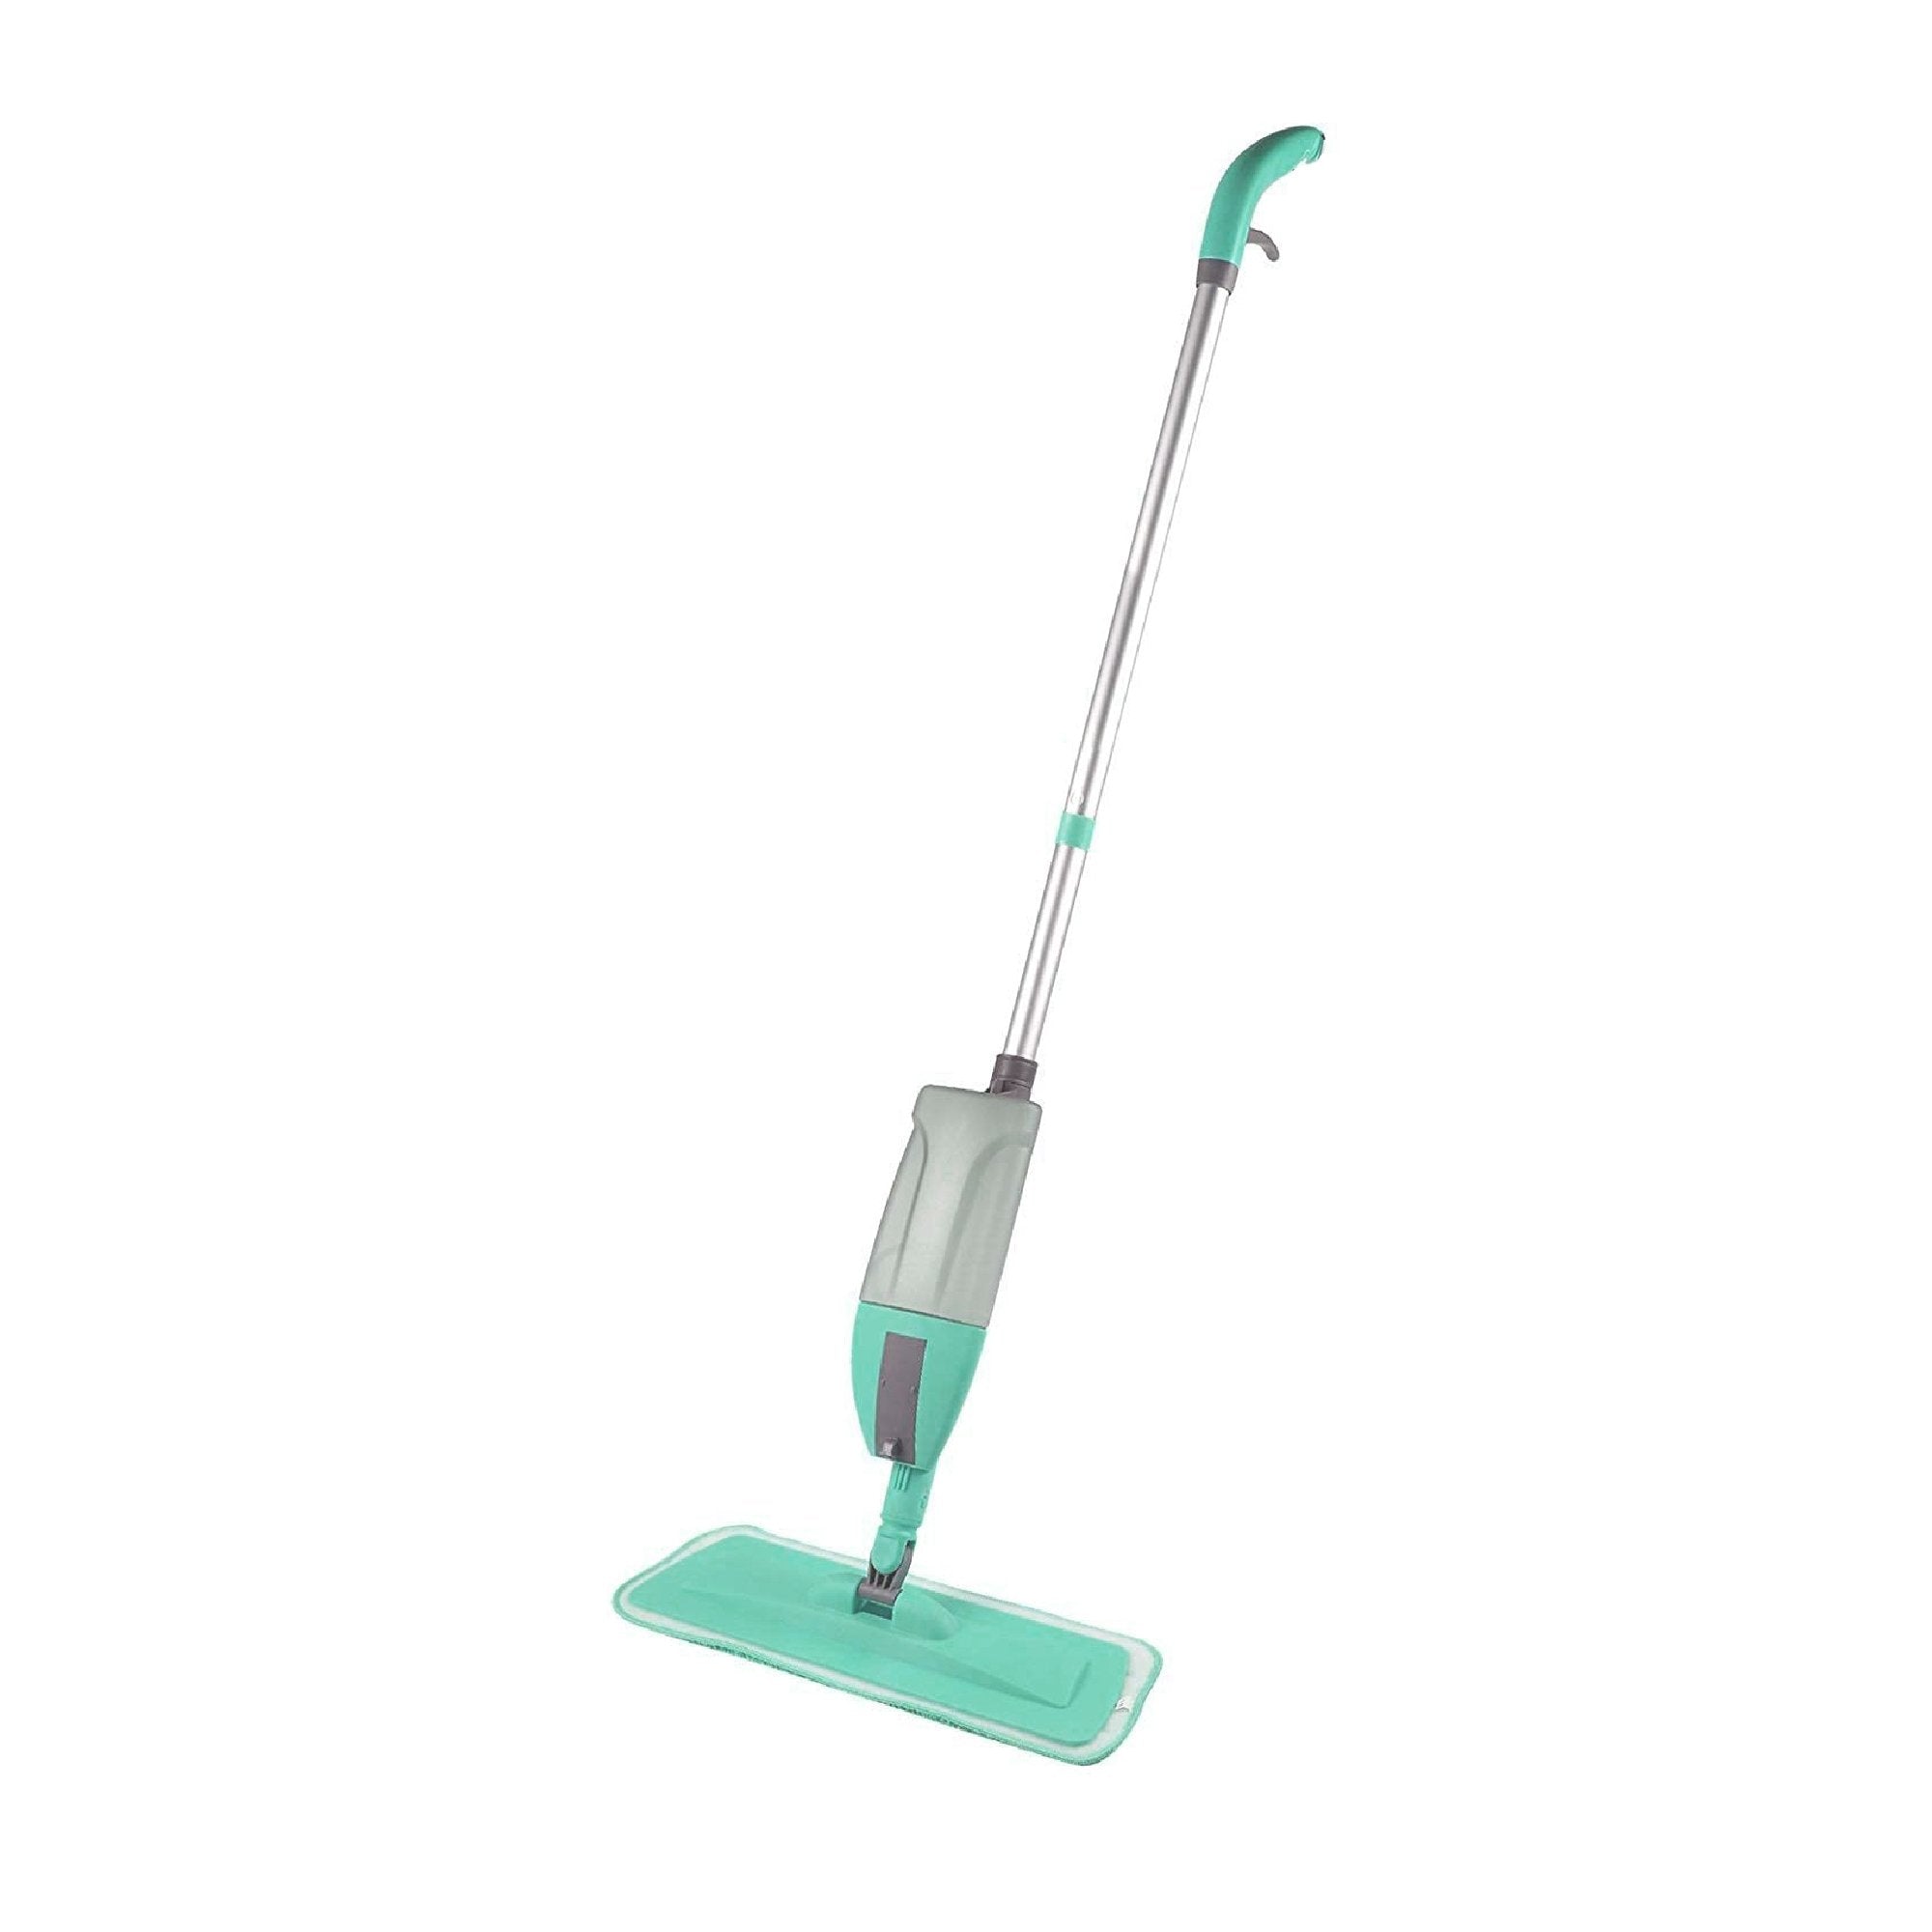 0802 Cleaning 360 Degree Healthy Spray Mop with Removable Washable Cleaning Pad - SkyShopy